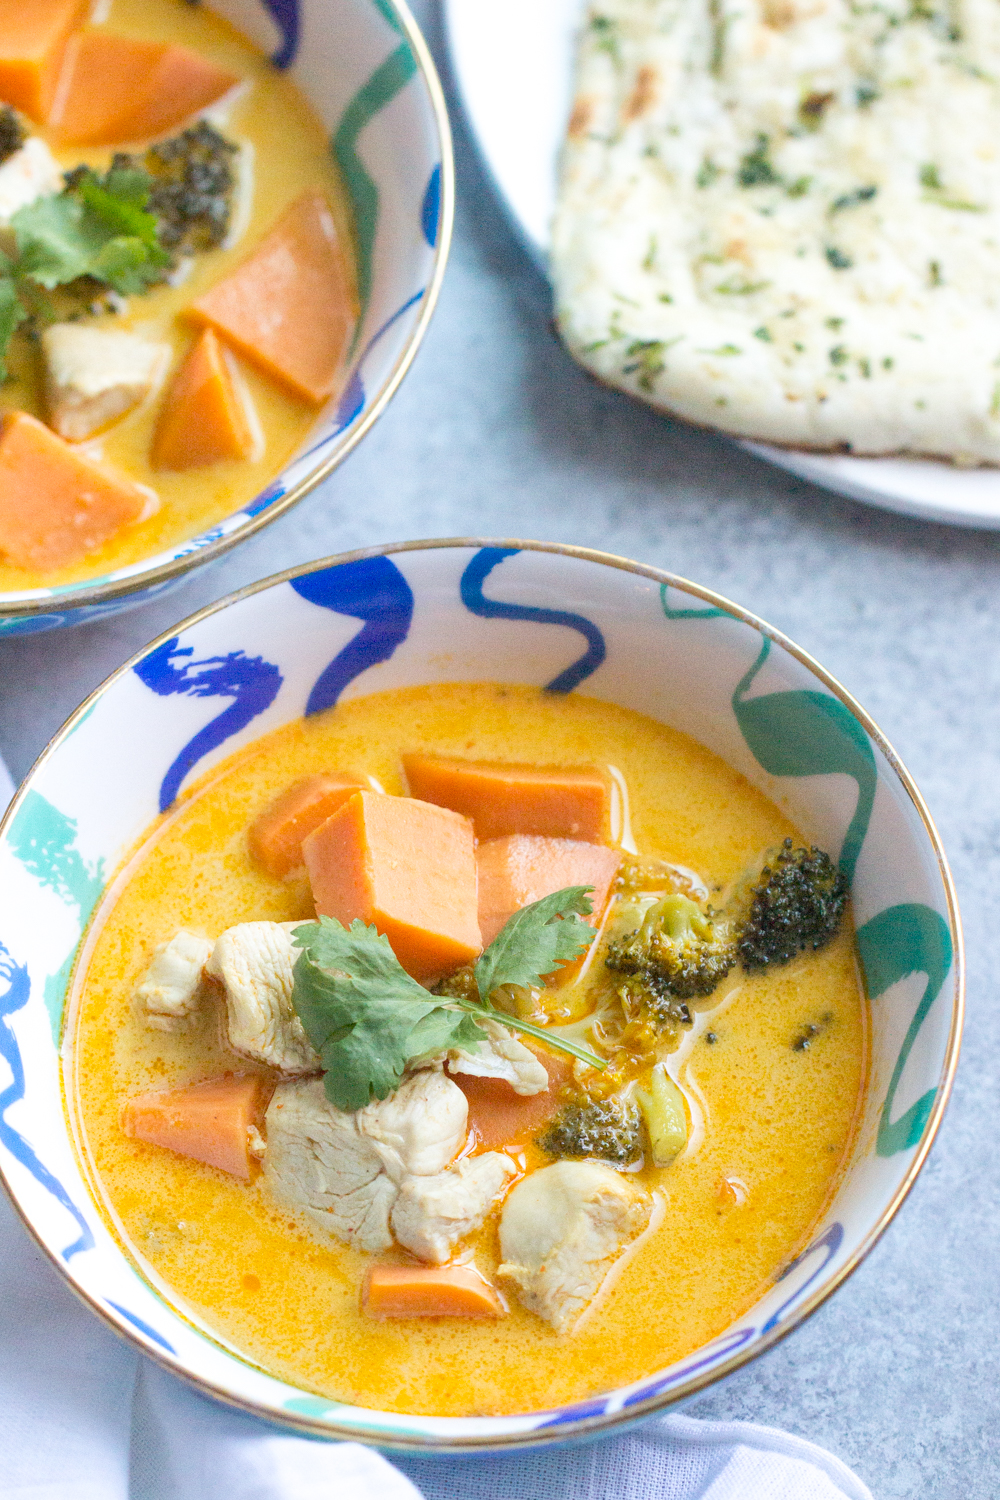 Sweet Potato Thai Curry Soup. Thai curry paste is a great condiment to keep in your pantry or refrigerator. Just a spoonful adds layers of flavor-sweet, salty, tangy, spicy-to a dish.